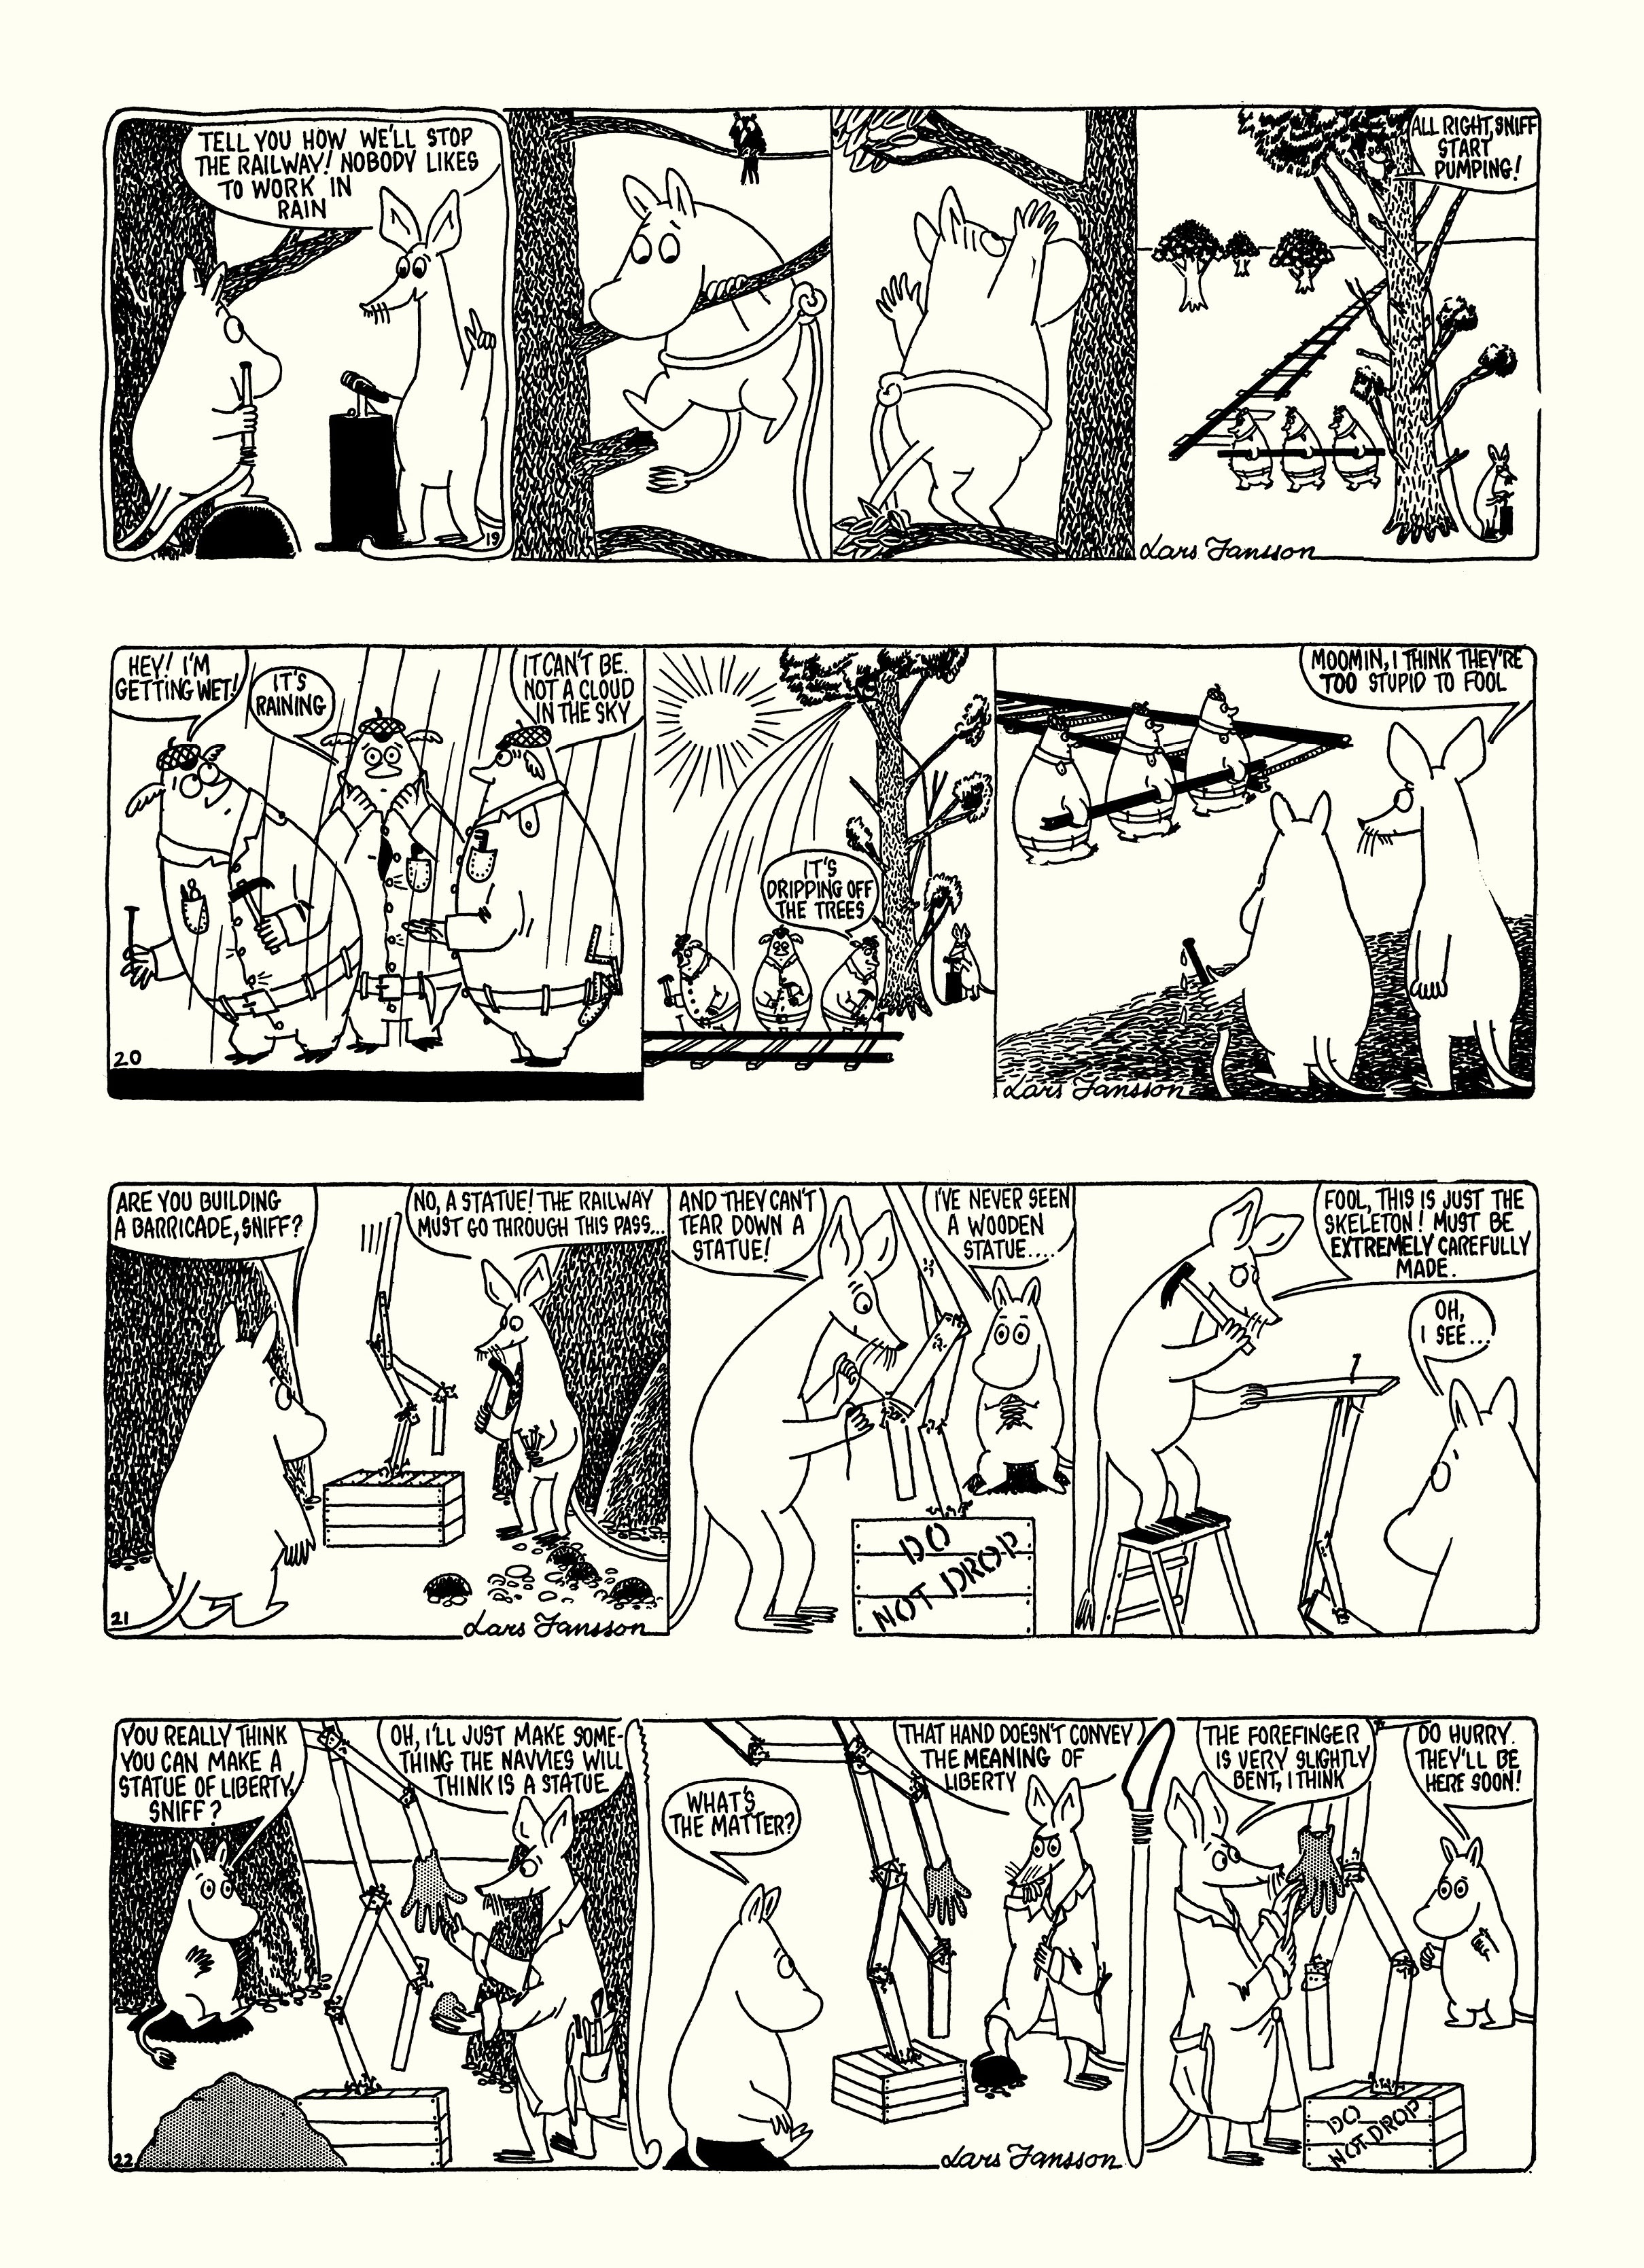 Read online Moomin: The Complete Lars Jansson Comic Strip comic -  Issue # TPB 6 - 31